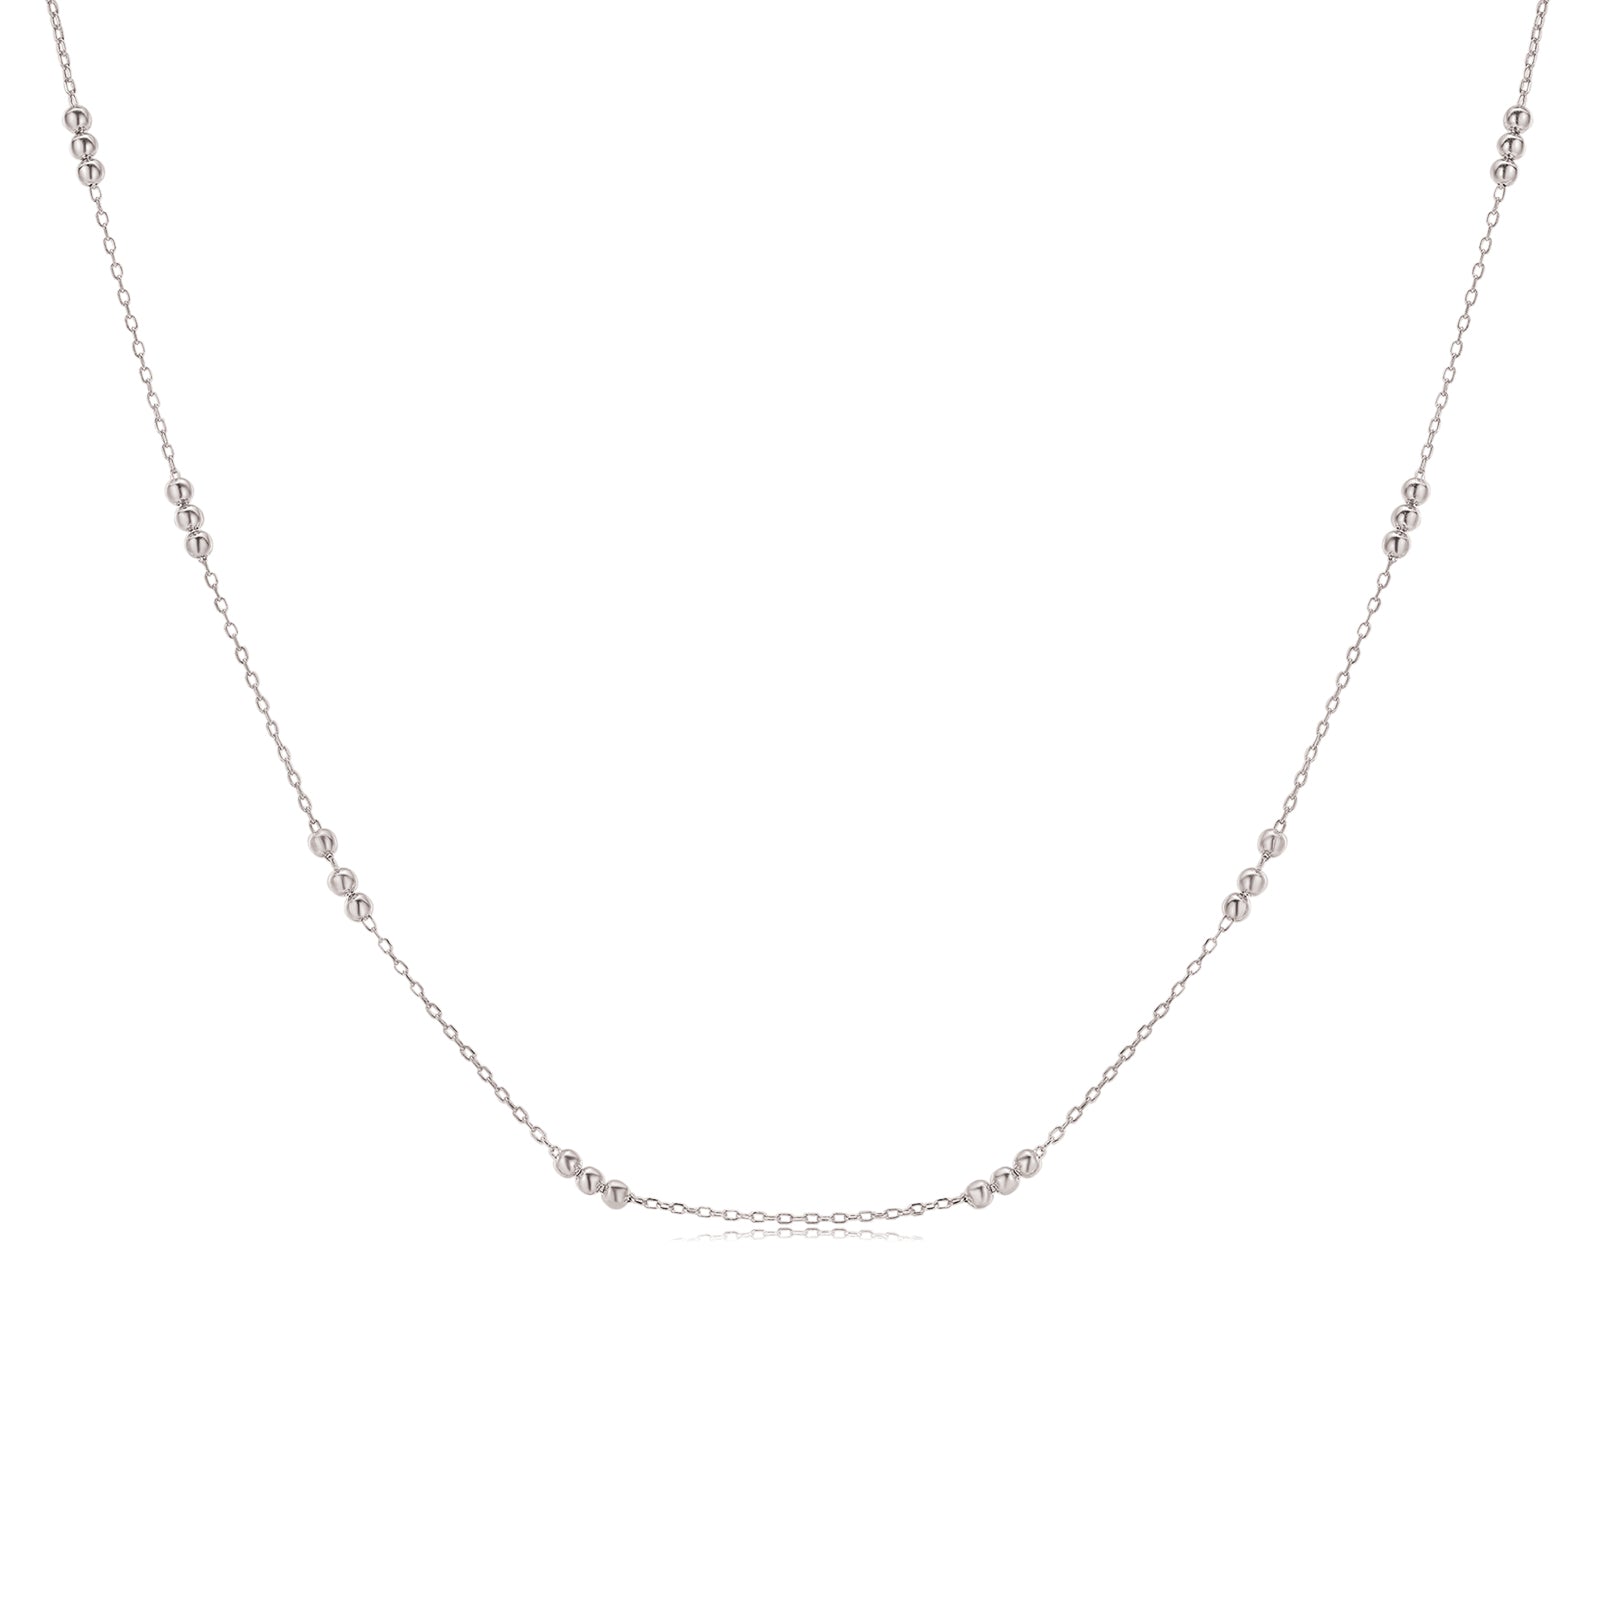 Silver Triple Beaded Chain | LOVE BY THE MOON